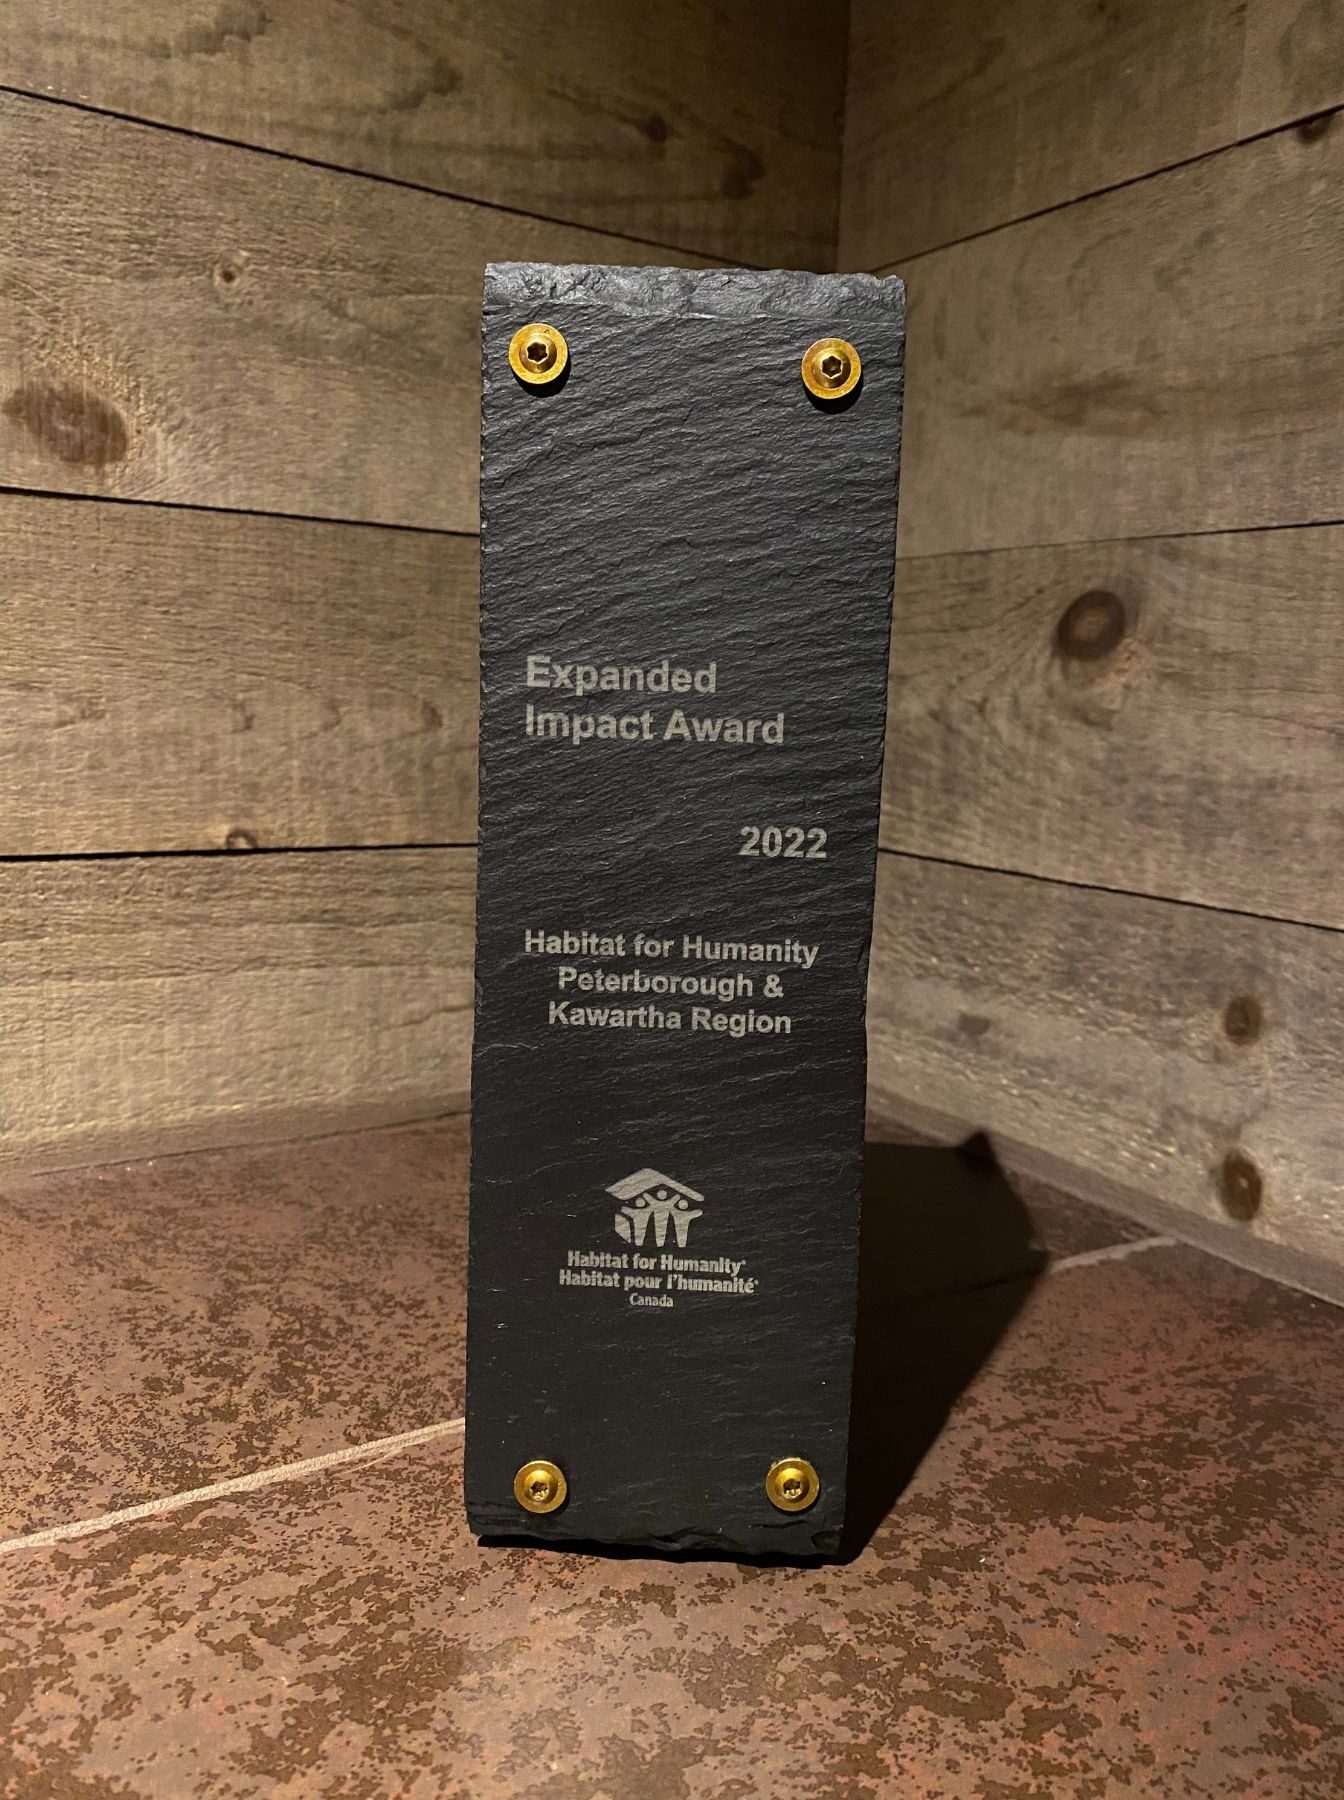 Expanded Impact Award trophy received by Habitat PKR at the Habitat Canada National Conference in Winnipeg Manitoba on May 10-12, 2023